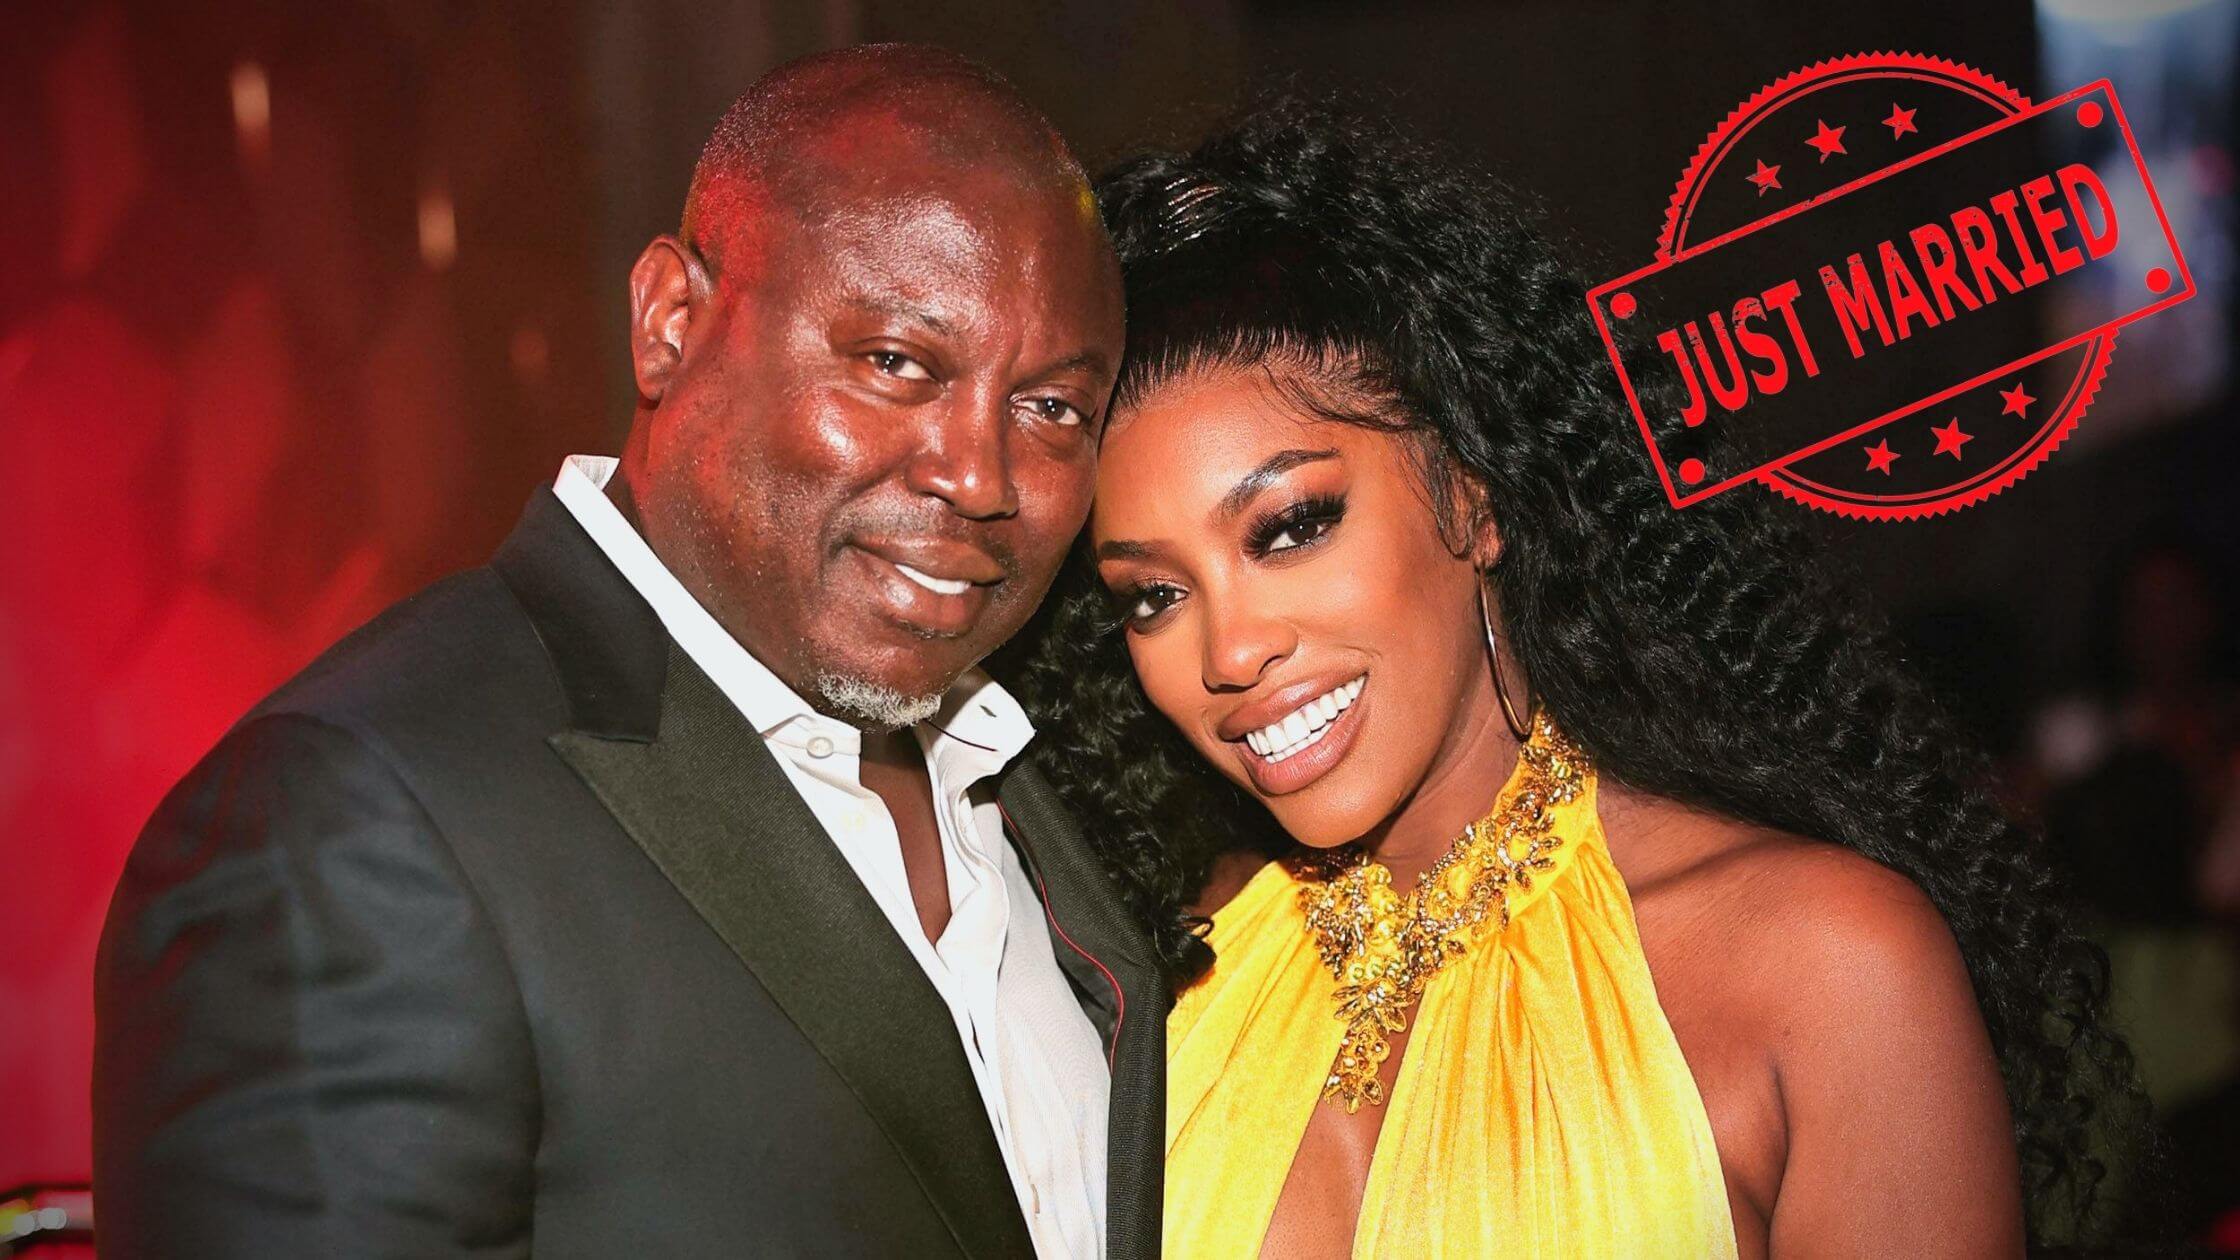 Fans Are In Awe Of Porsha Williams' Marriage To Her Soulmate